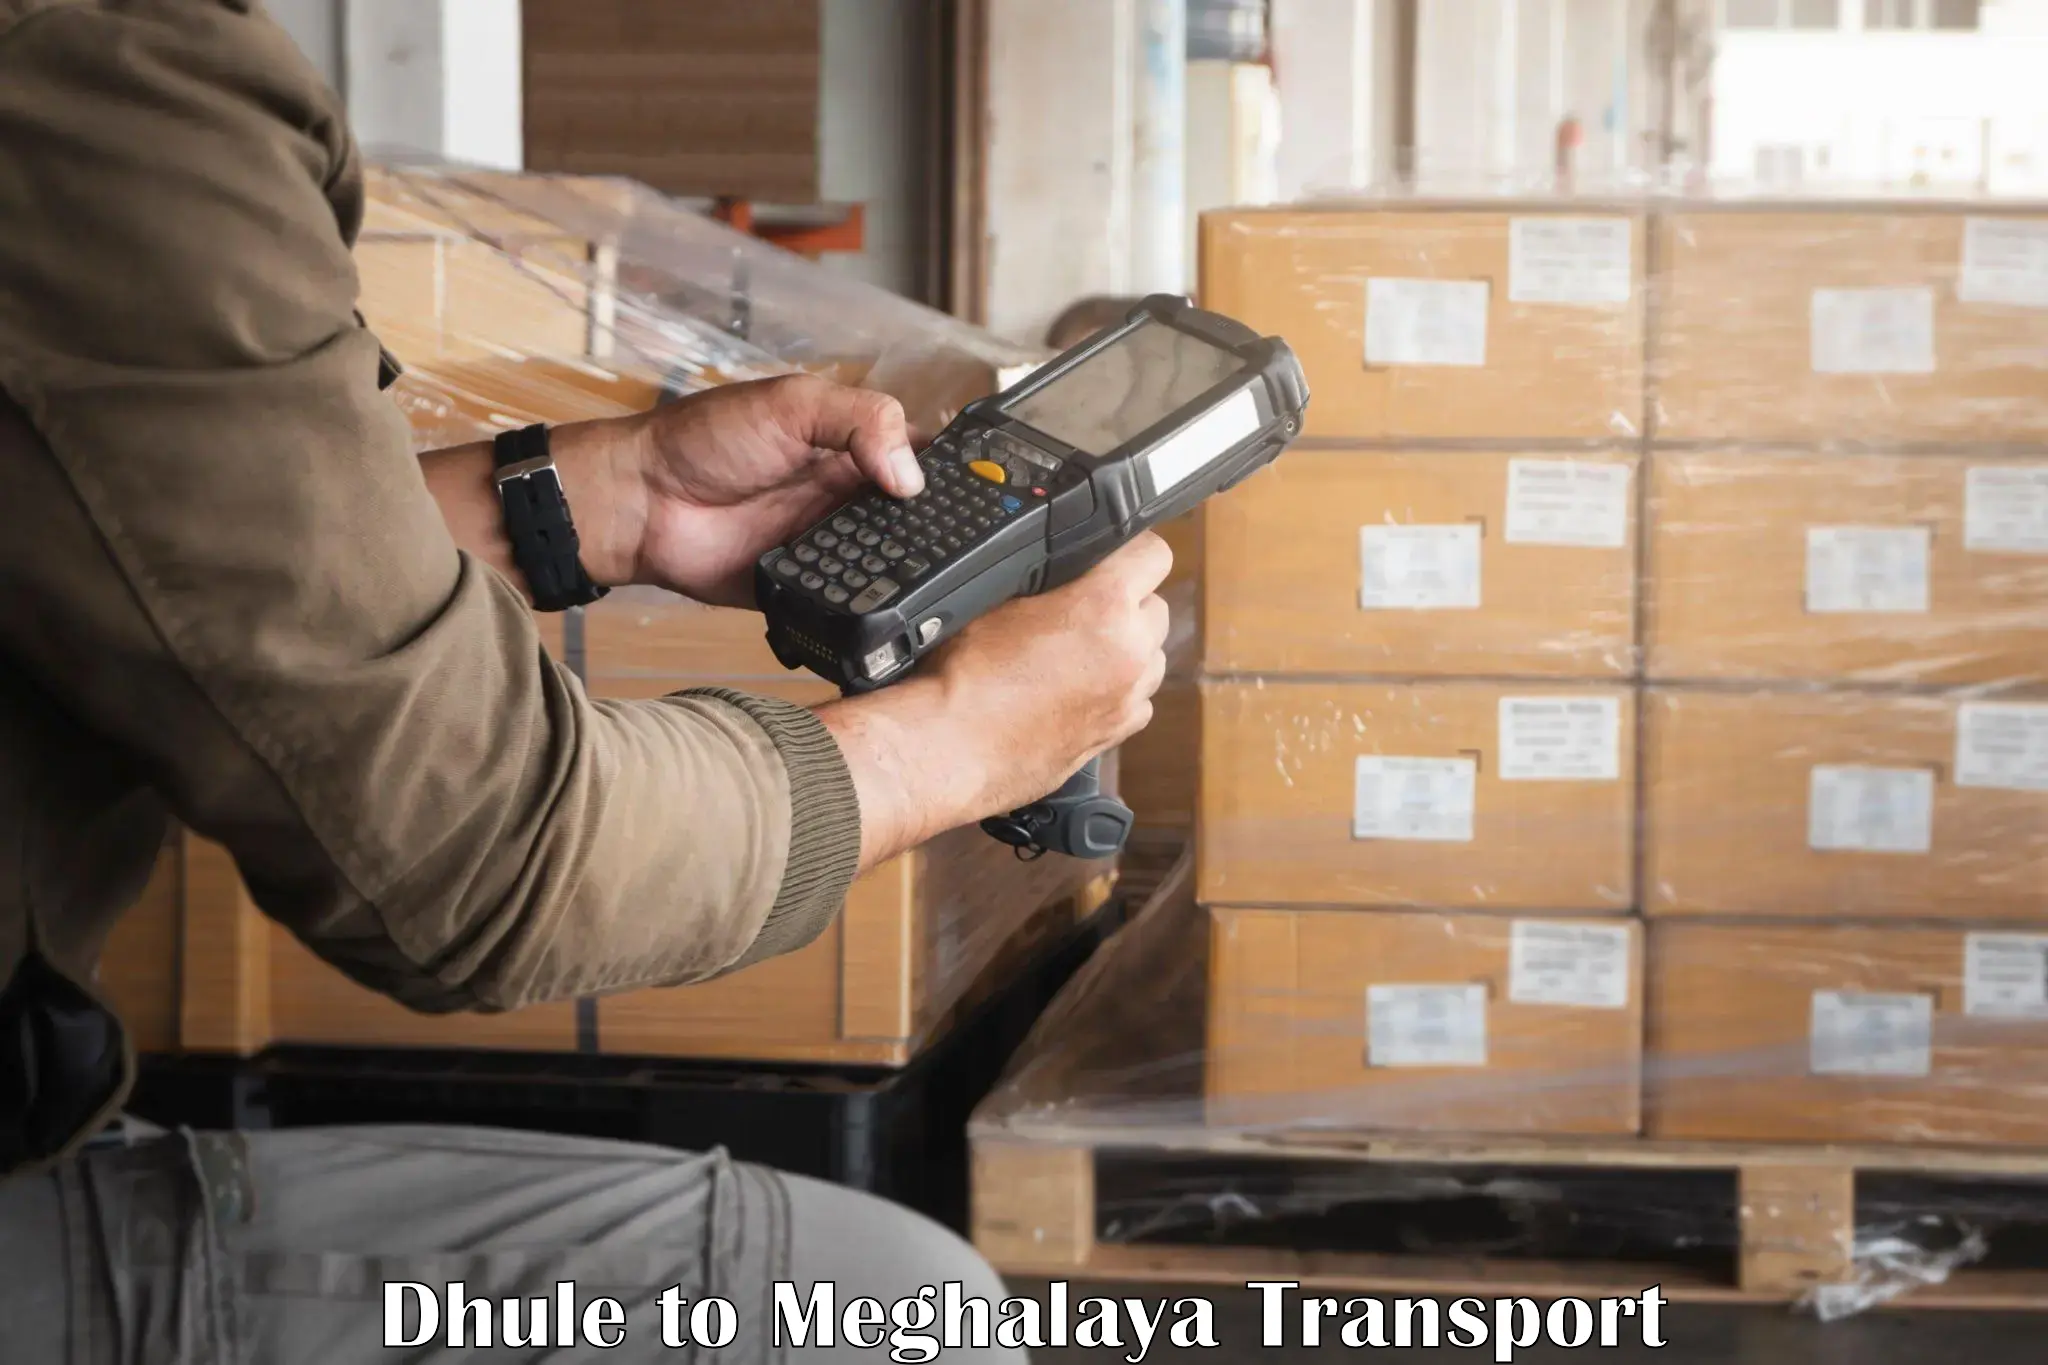 Daily parcel service transport Dhule to Meghalaya